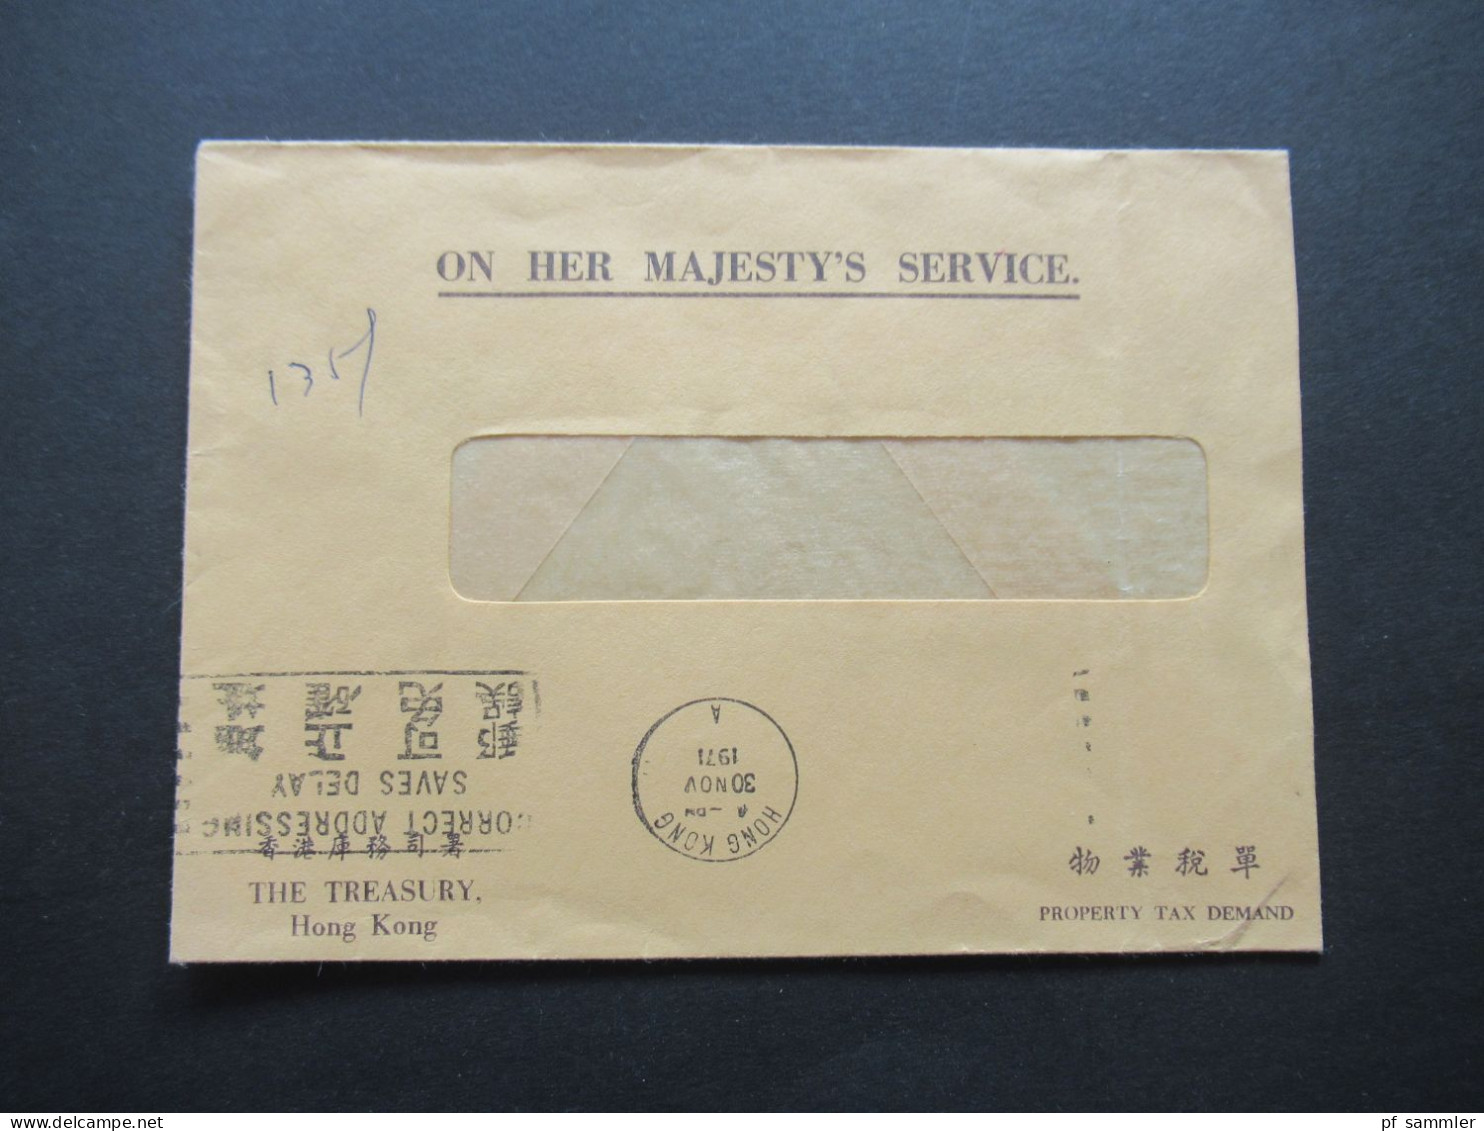 30.11.1971 GB Kolonie Hong Kong OHMS Umschlag / The Treasury Hong Kong / Property Tax Demand - Covers & Documents